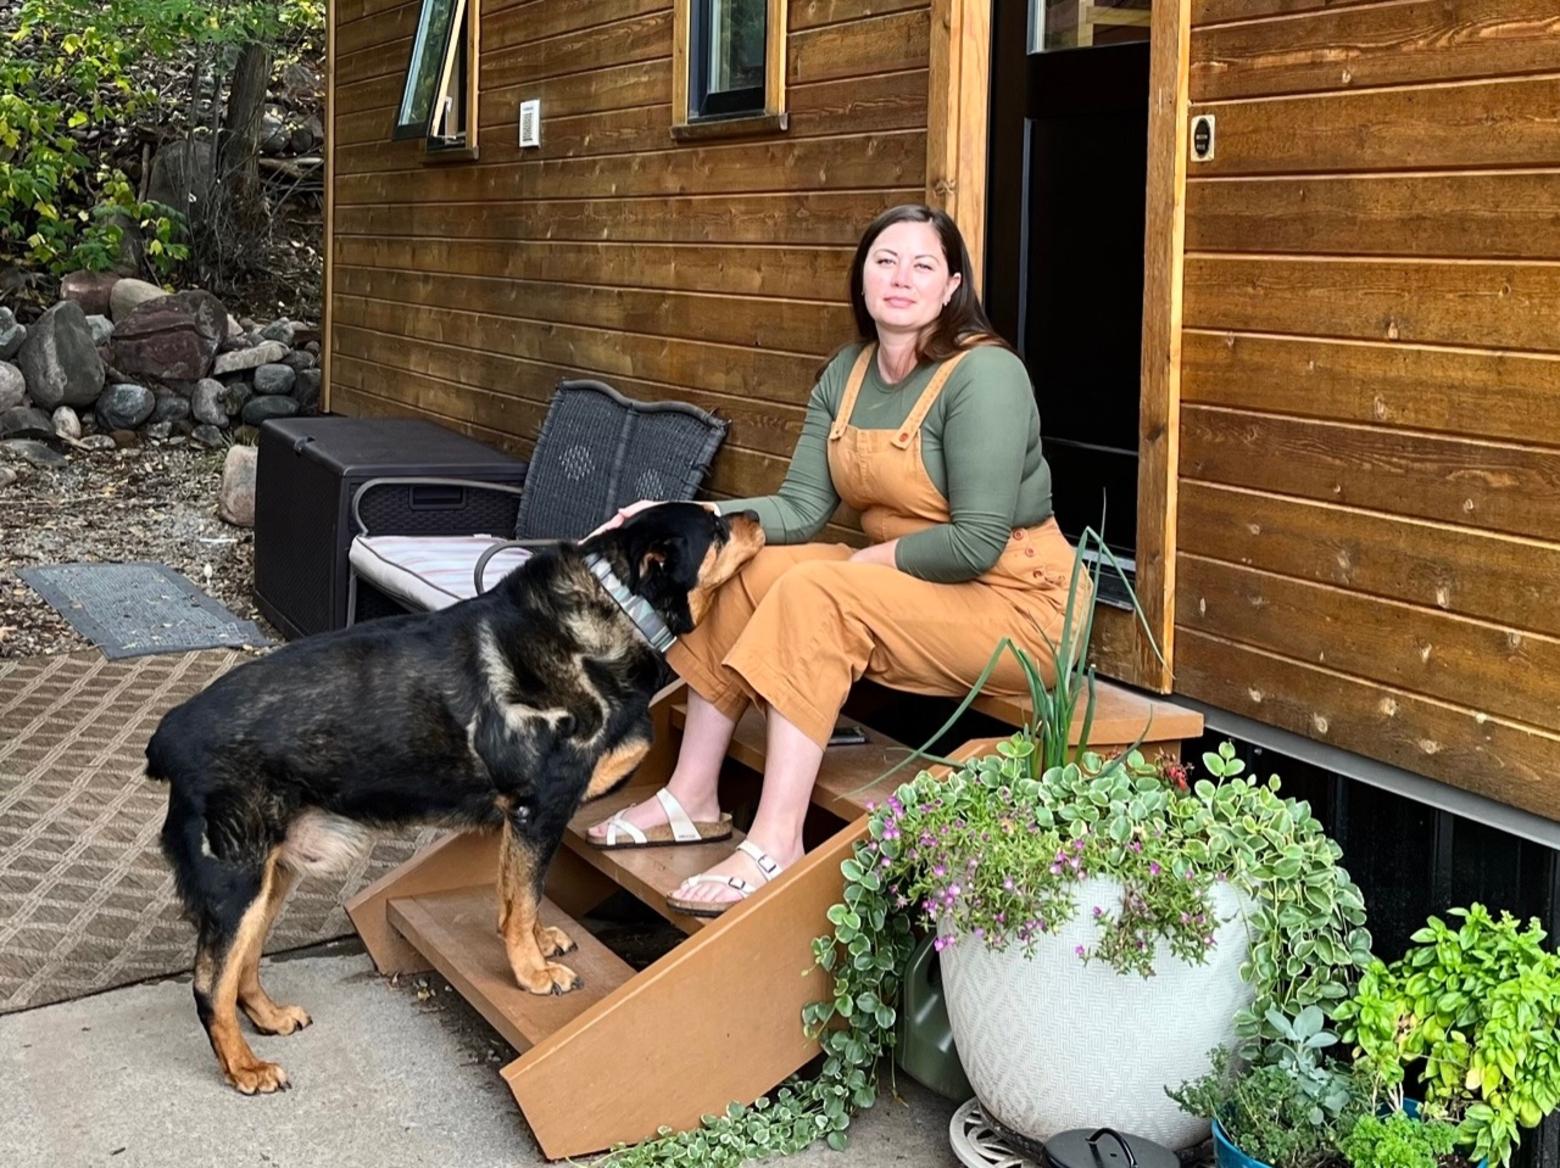 Candace McNatt and dog on the stoop of her home in Durango, Colorado's Oasis Park. Her neighborhood is nicknamed "tiny town" because of the number of tiny homes. Photo courtesy Candace McNatt